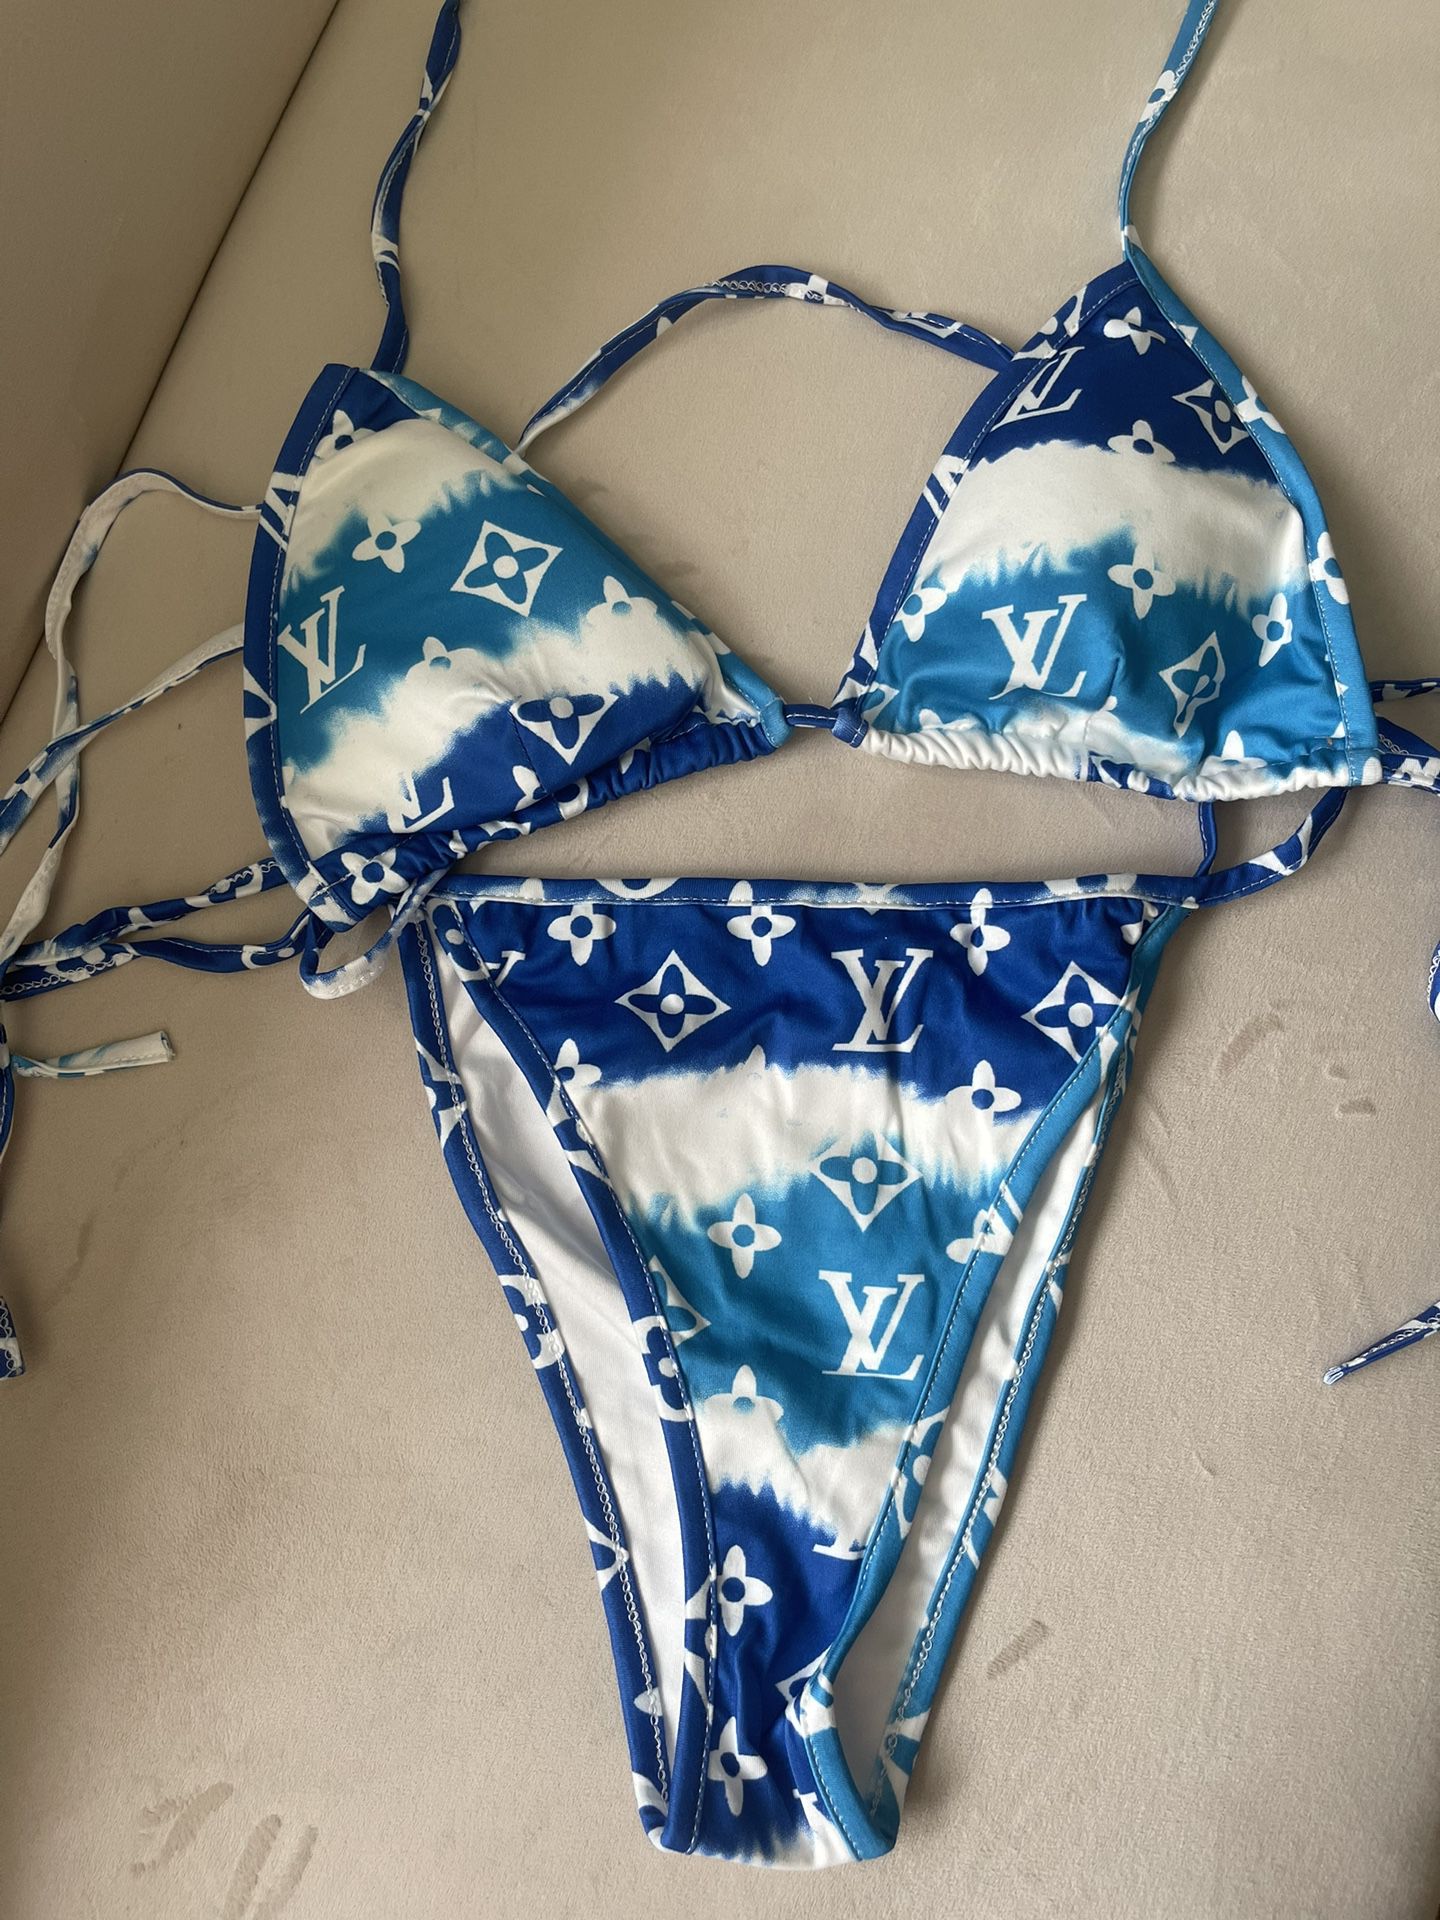 LV Swimsuit Size Medium Brand new for Sale in Fort Lauderdale, FL